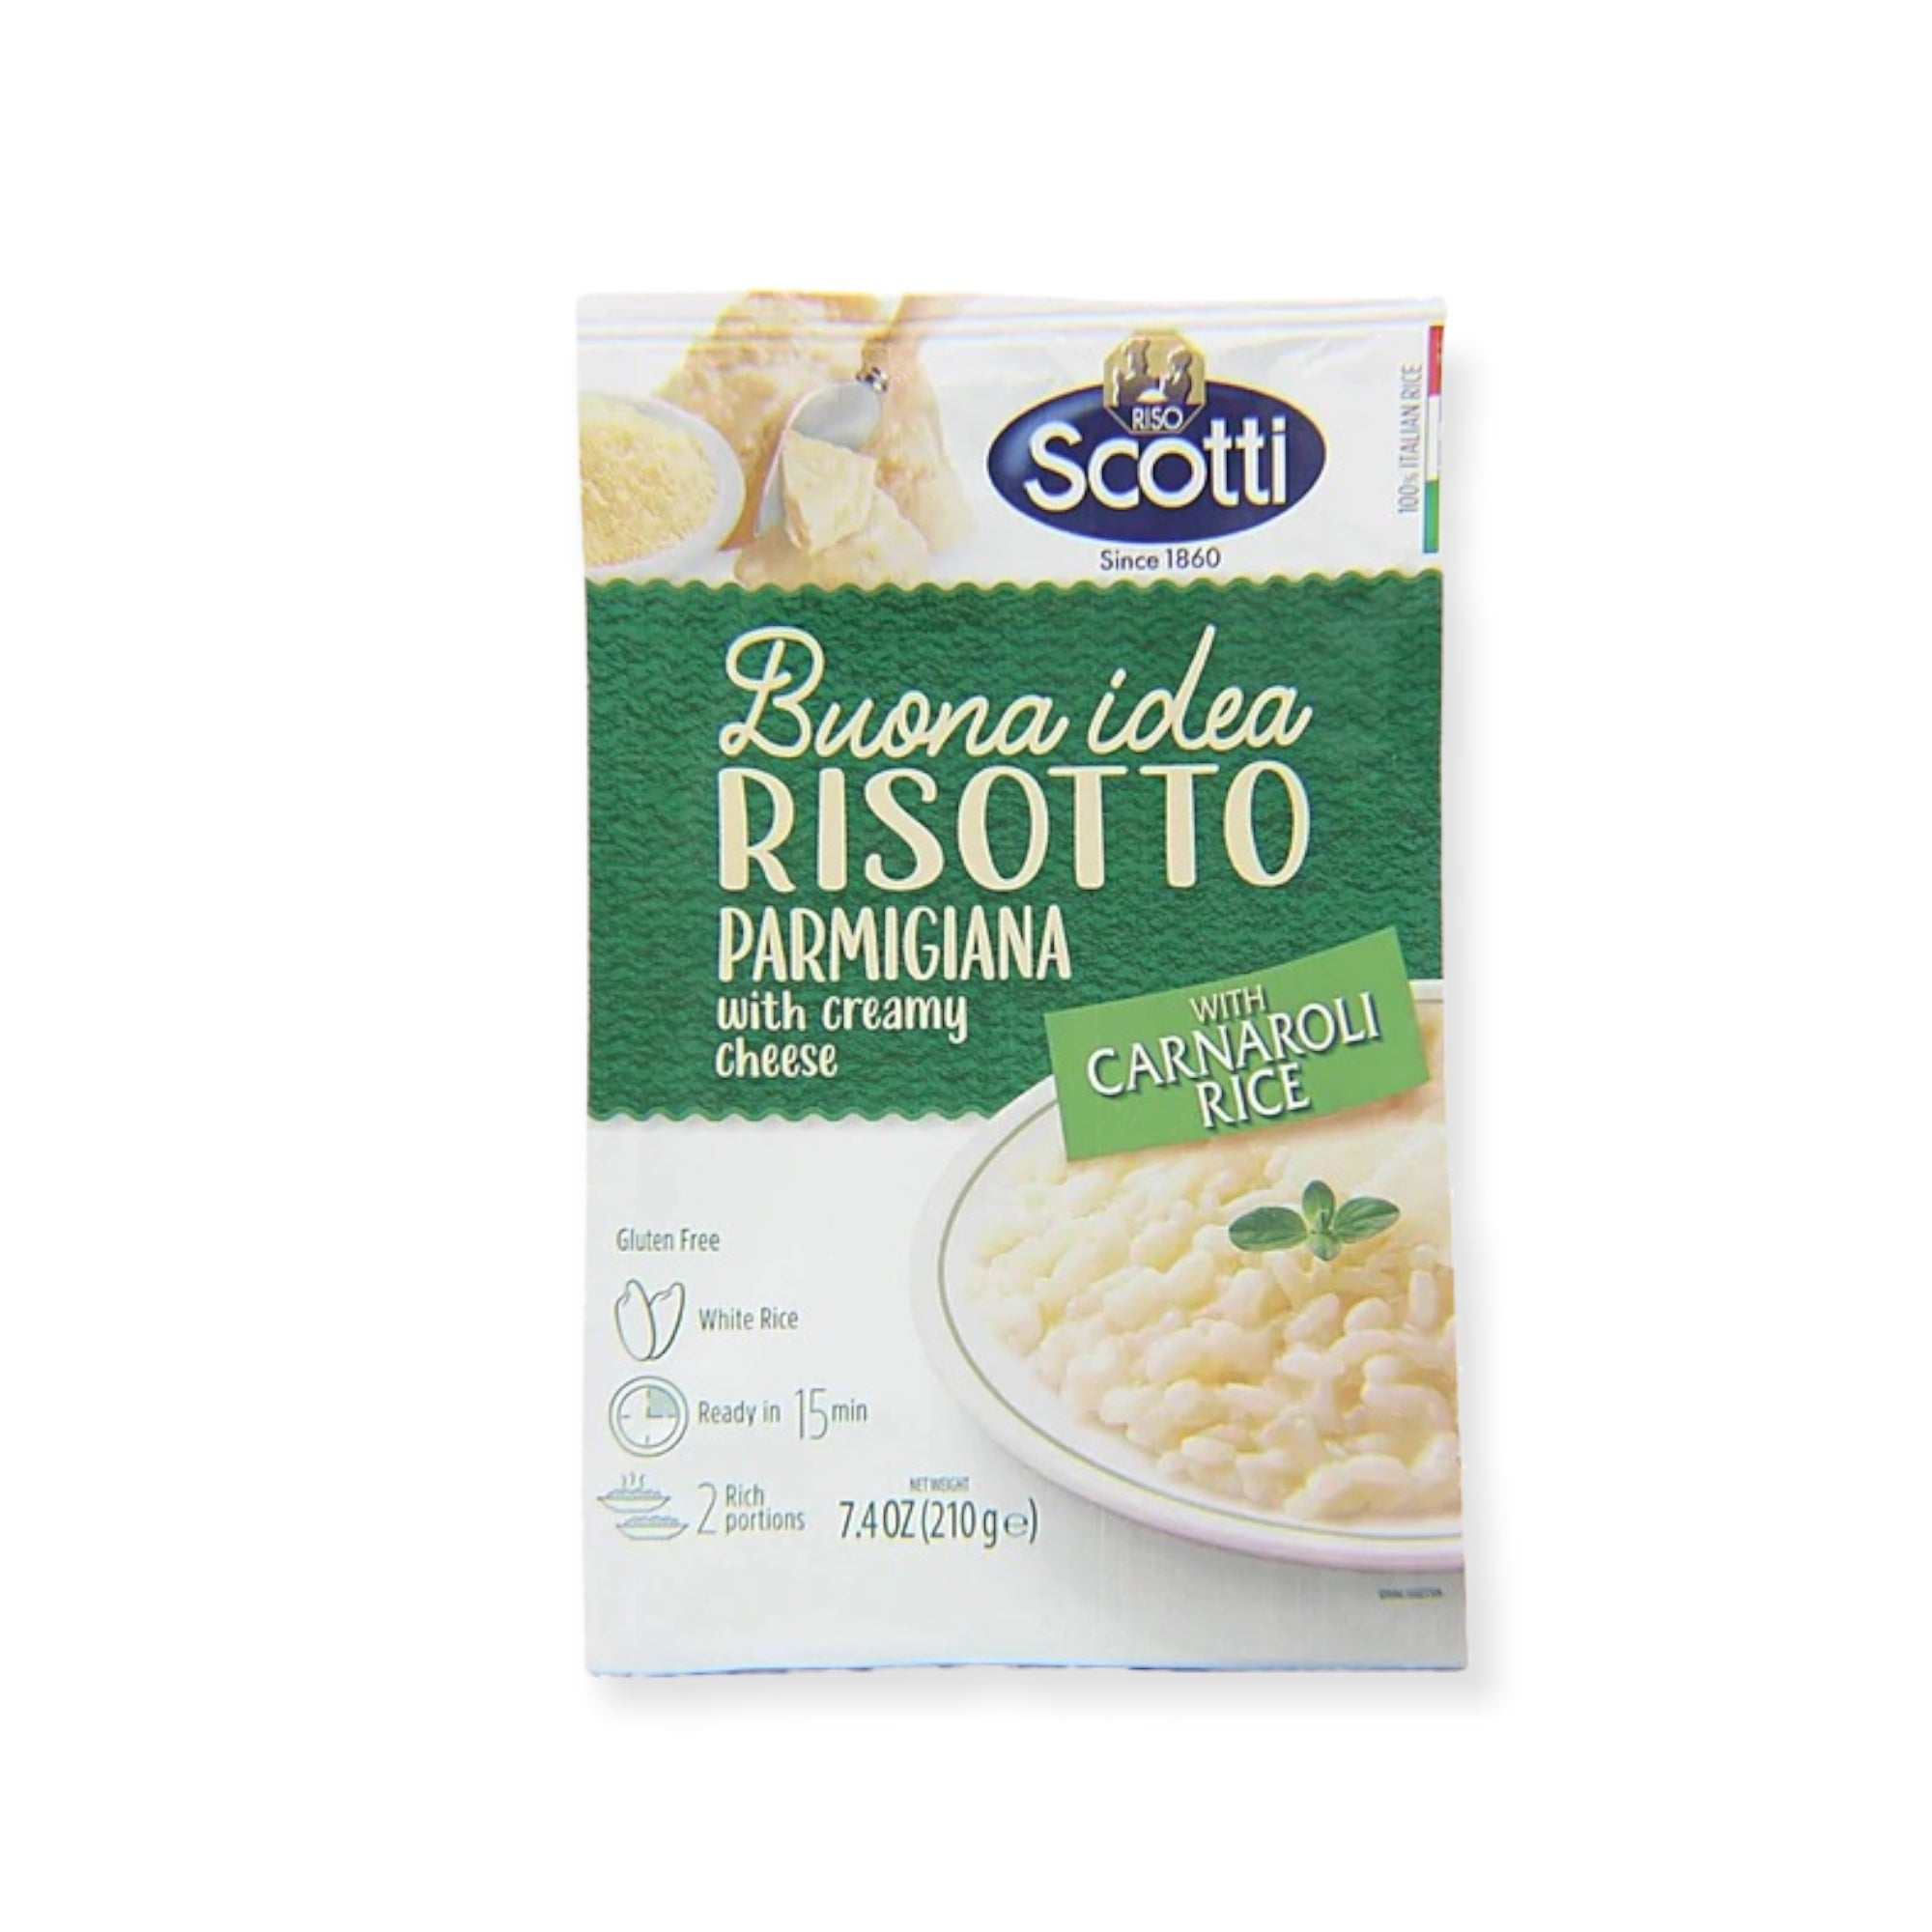 Risotto with Parmesan Cheese Product of Italy, 7.4 oz / 210g